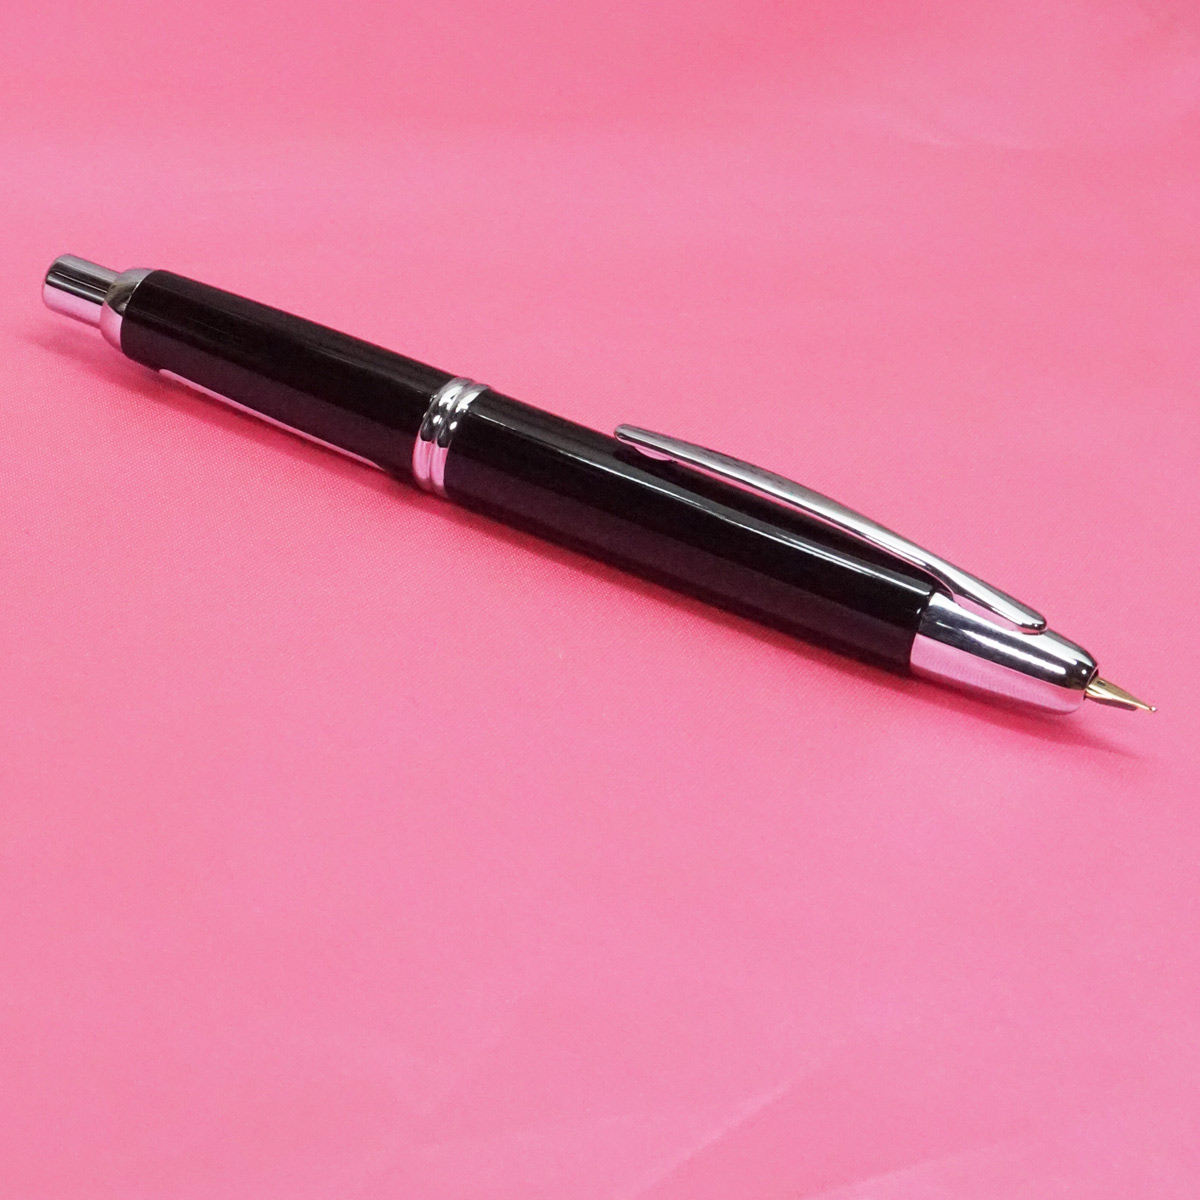 Pilot Capless Black Body with Silver Trims Namiki Rubber Sac Converter Type Fountain Pen with Gold Plated Medium Tipped Nib  SKU 21976